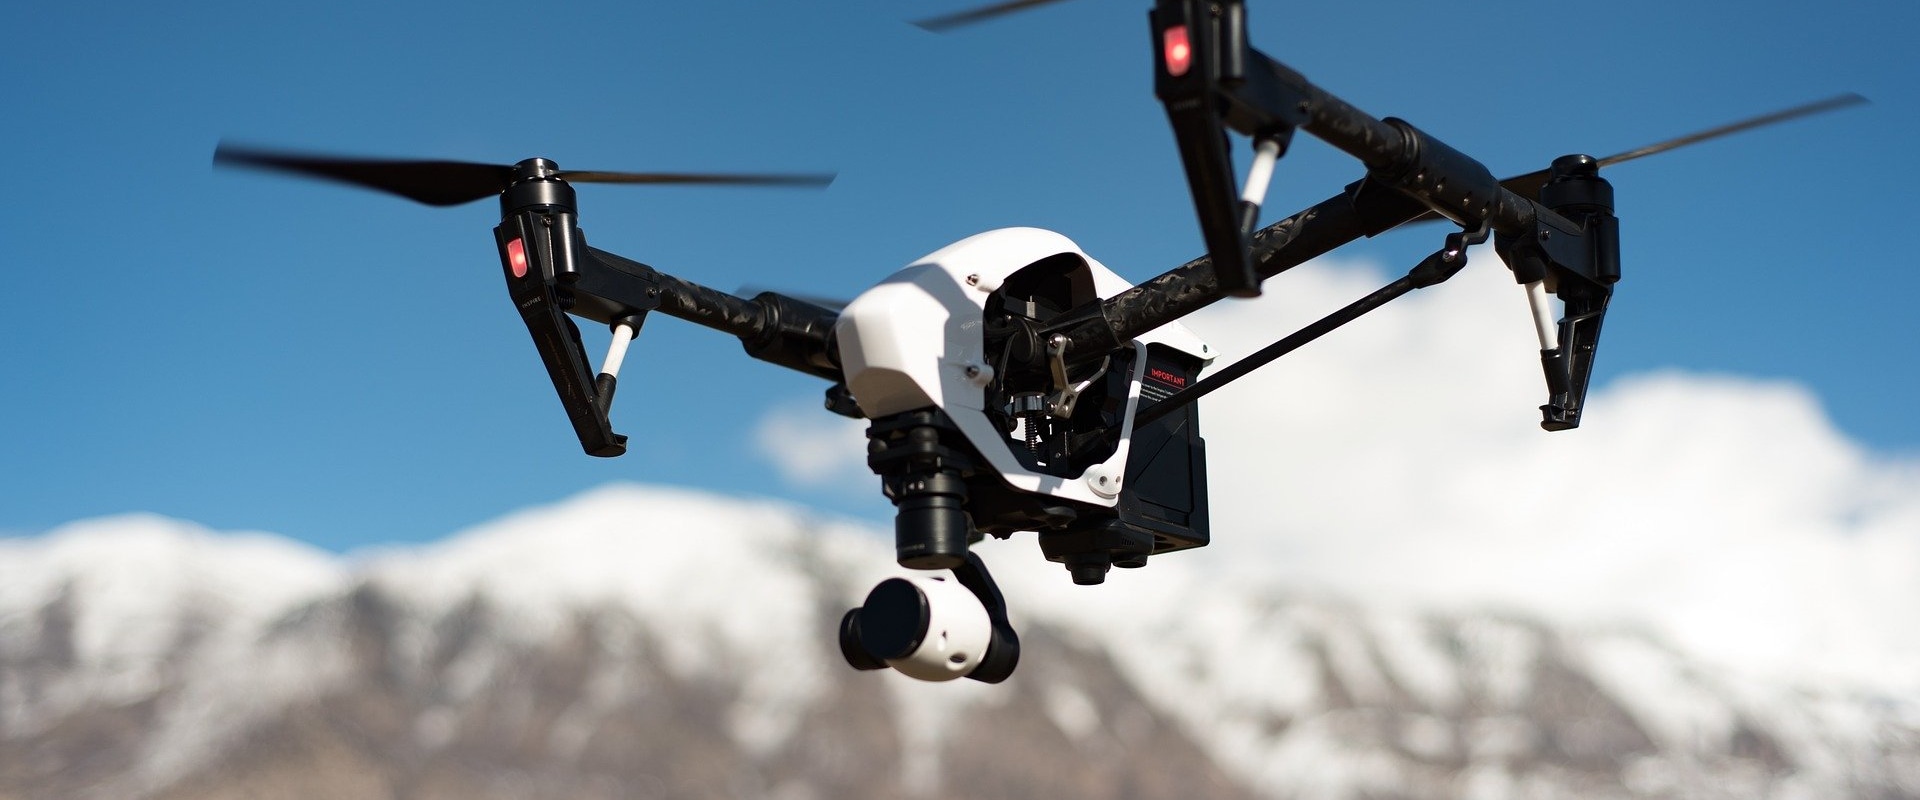 Can drones be automated?